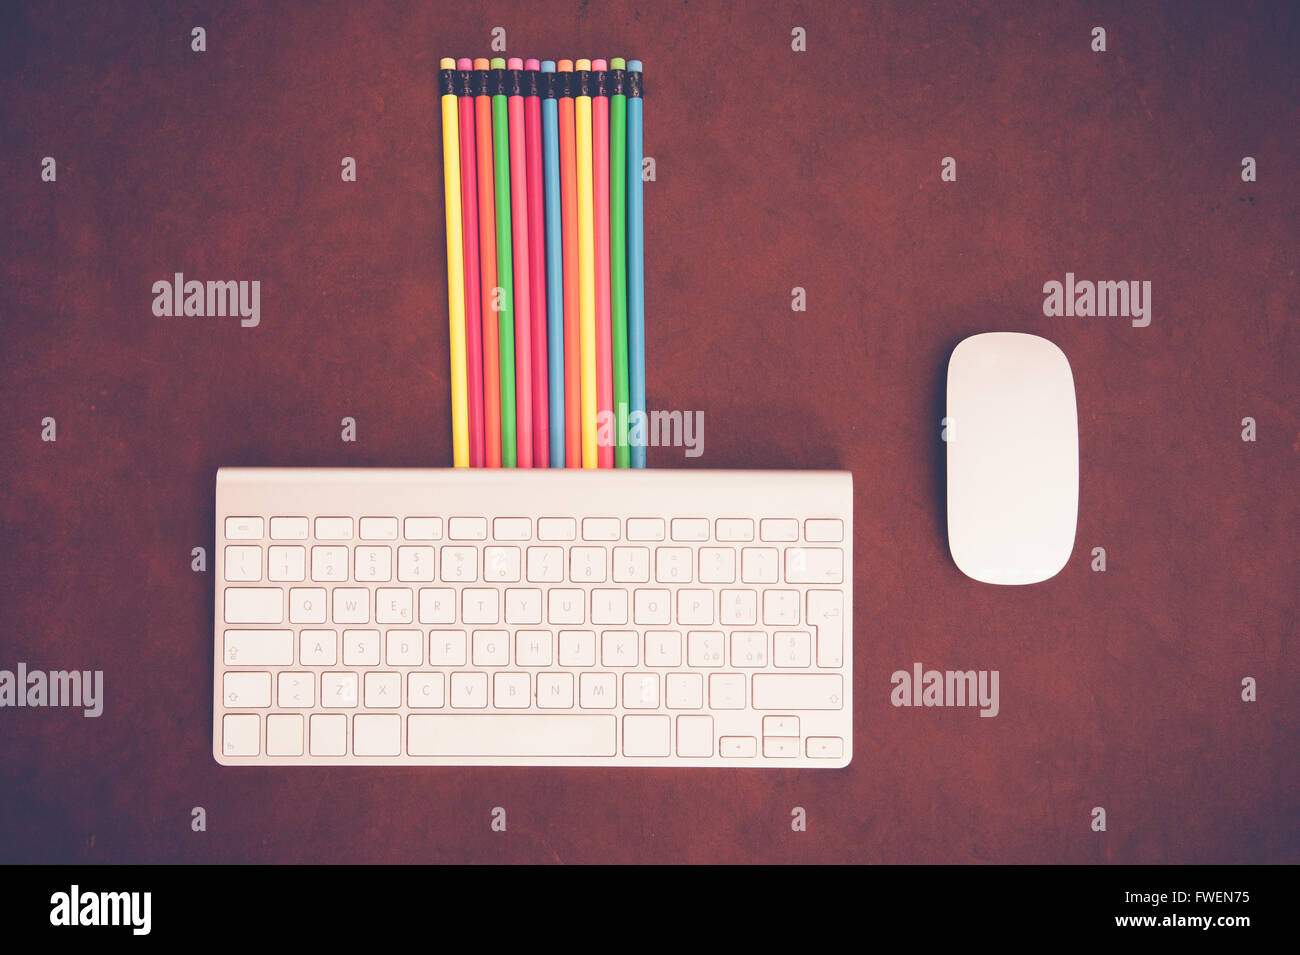 Wooden desktop with colorful pencil and computer keyboard and mouse Stock Photo